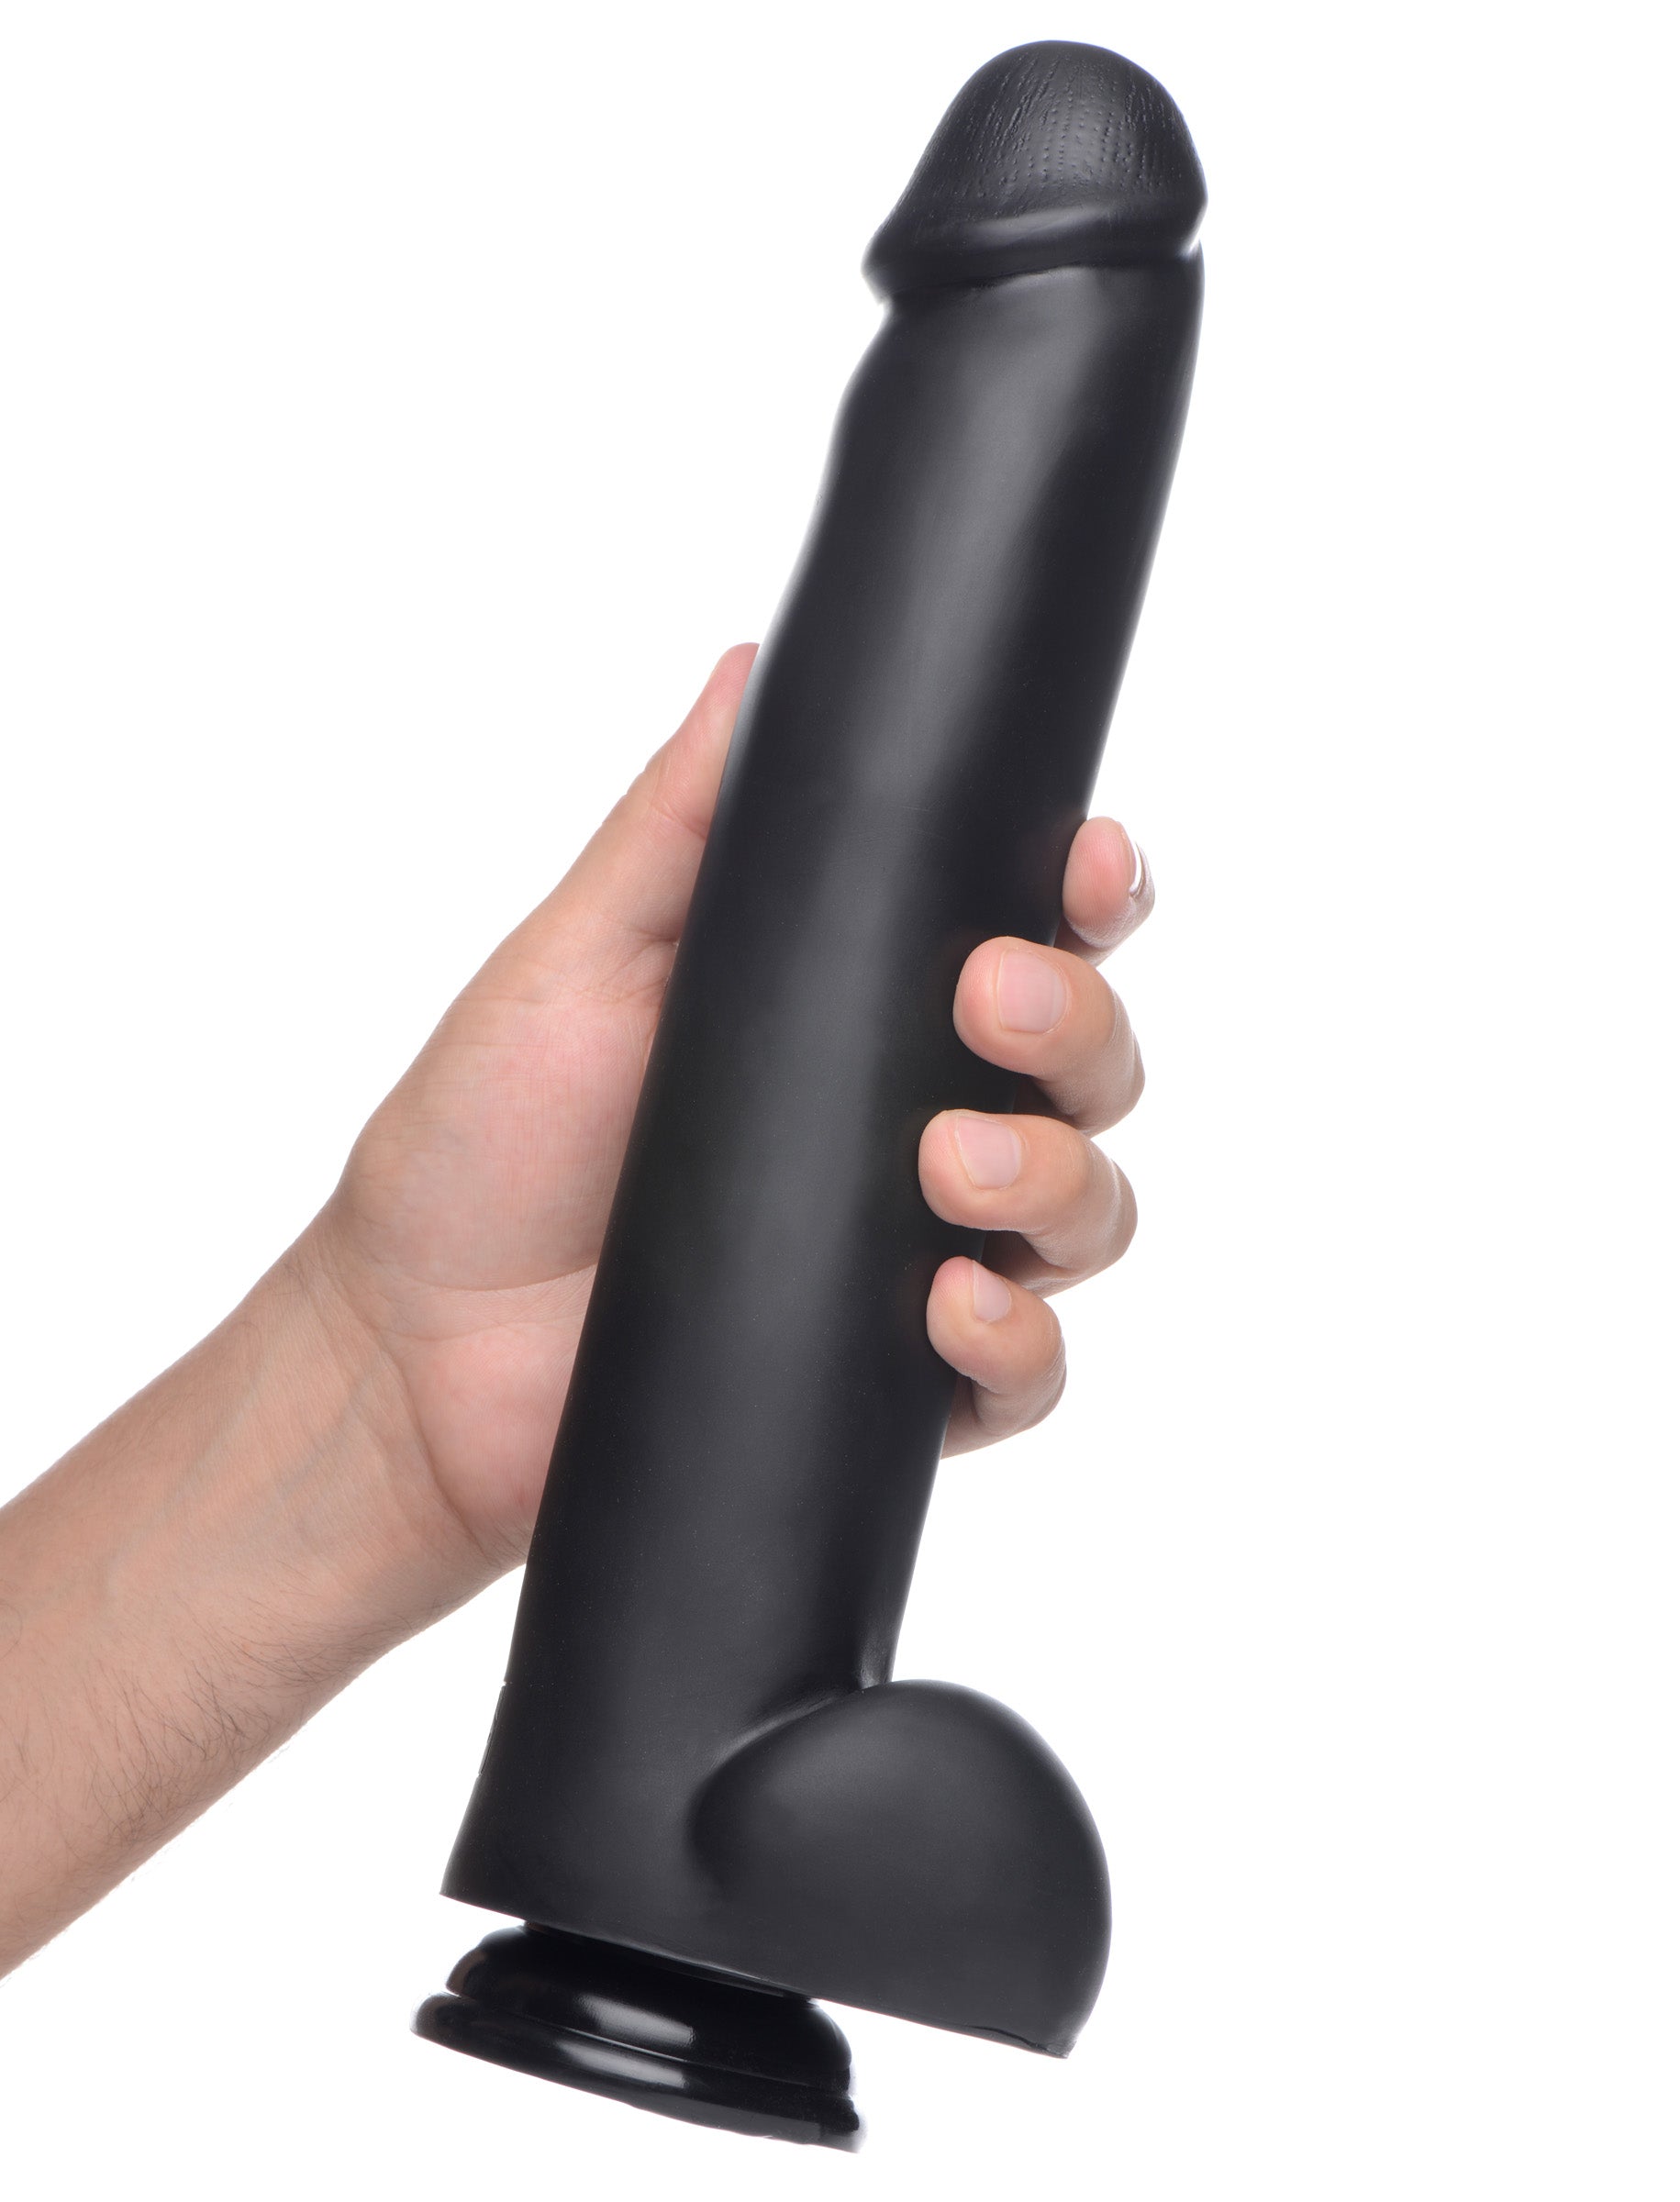 The Master Suction Cup Dildo